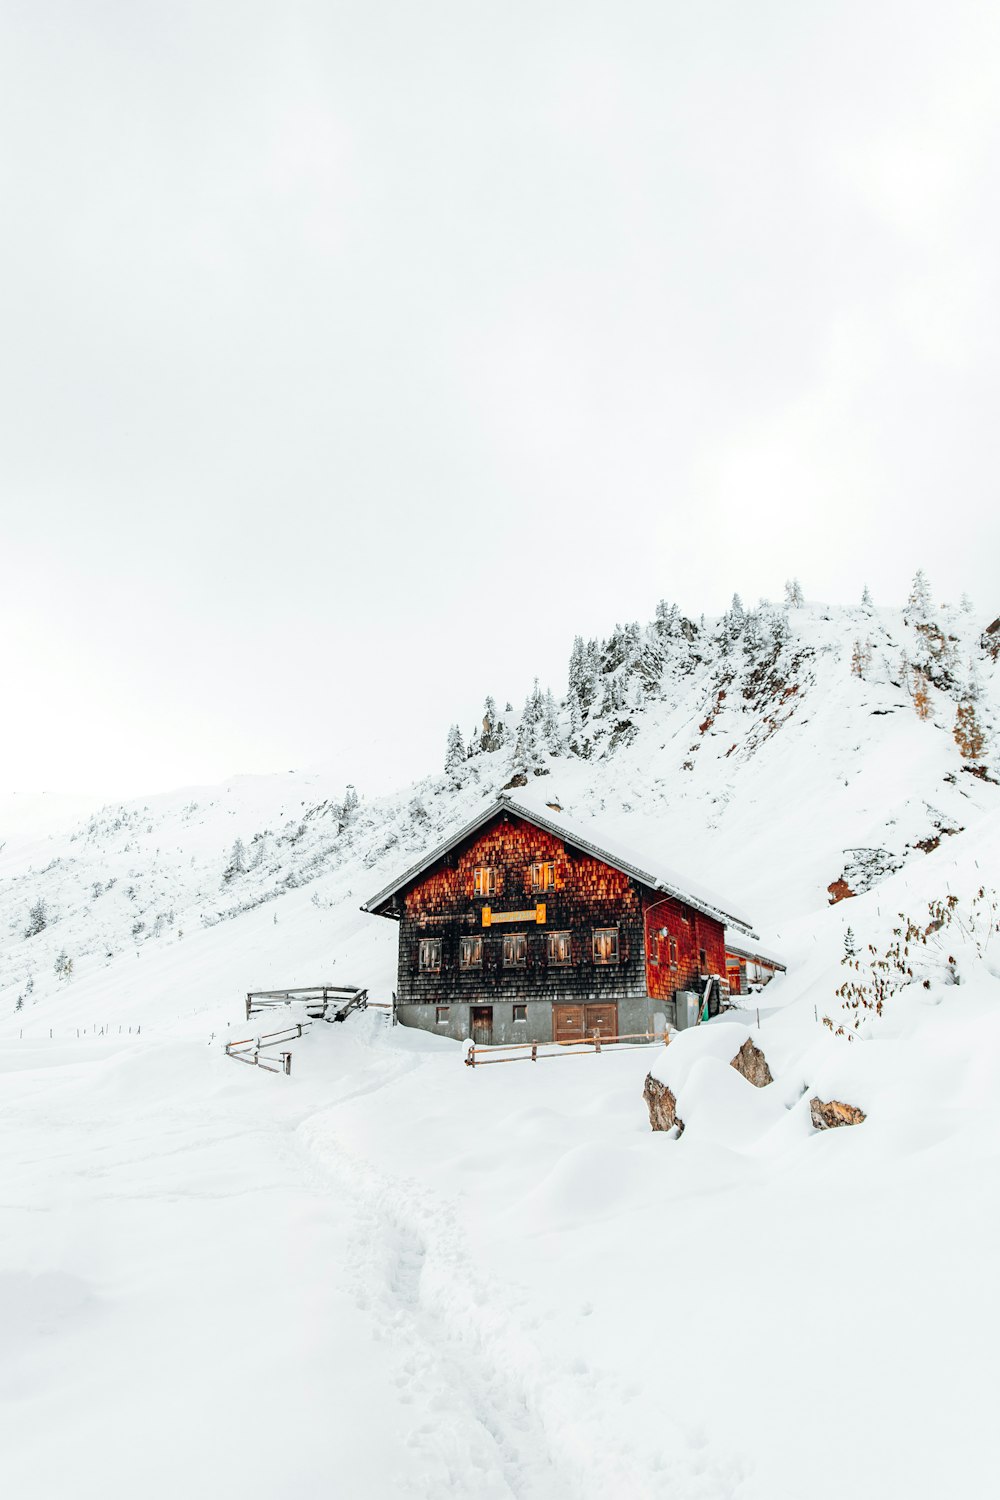 brown wooden house on snow covered ground